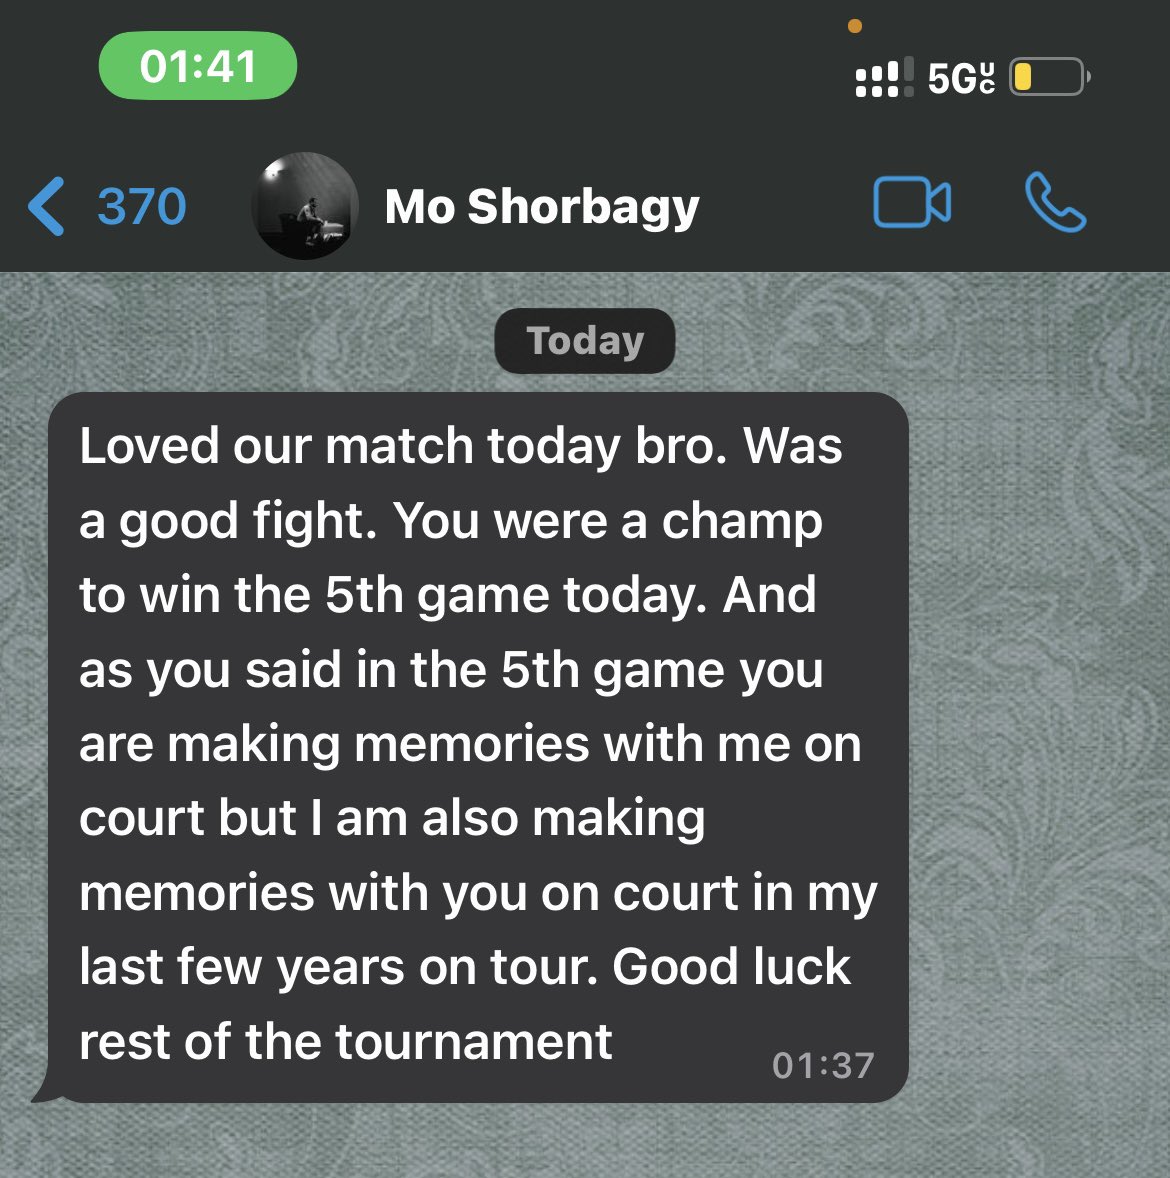 That's what matters the most!! 👑🙏 @MoElshorbagy